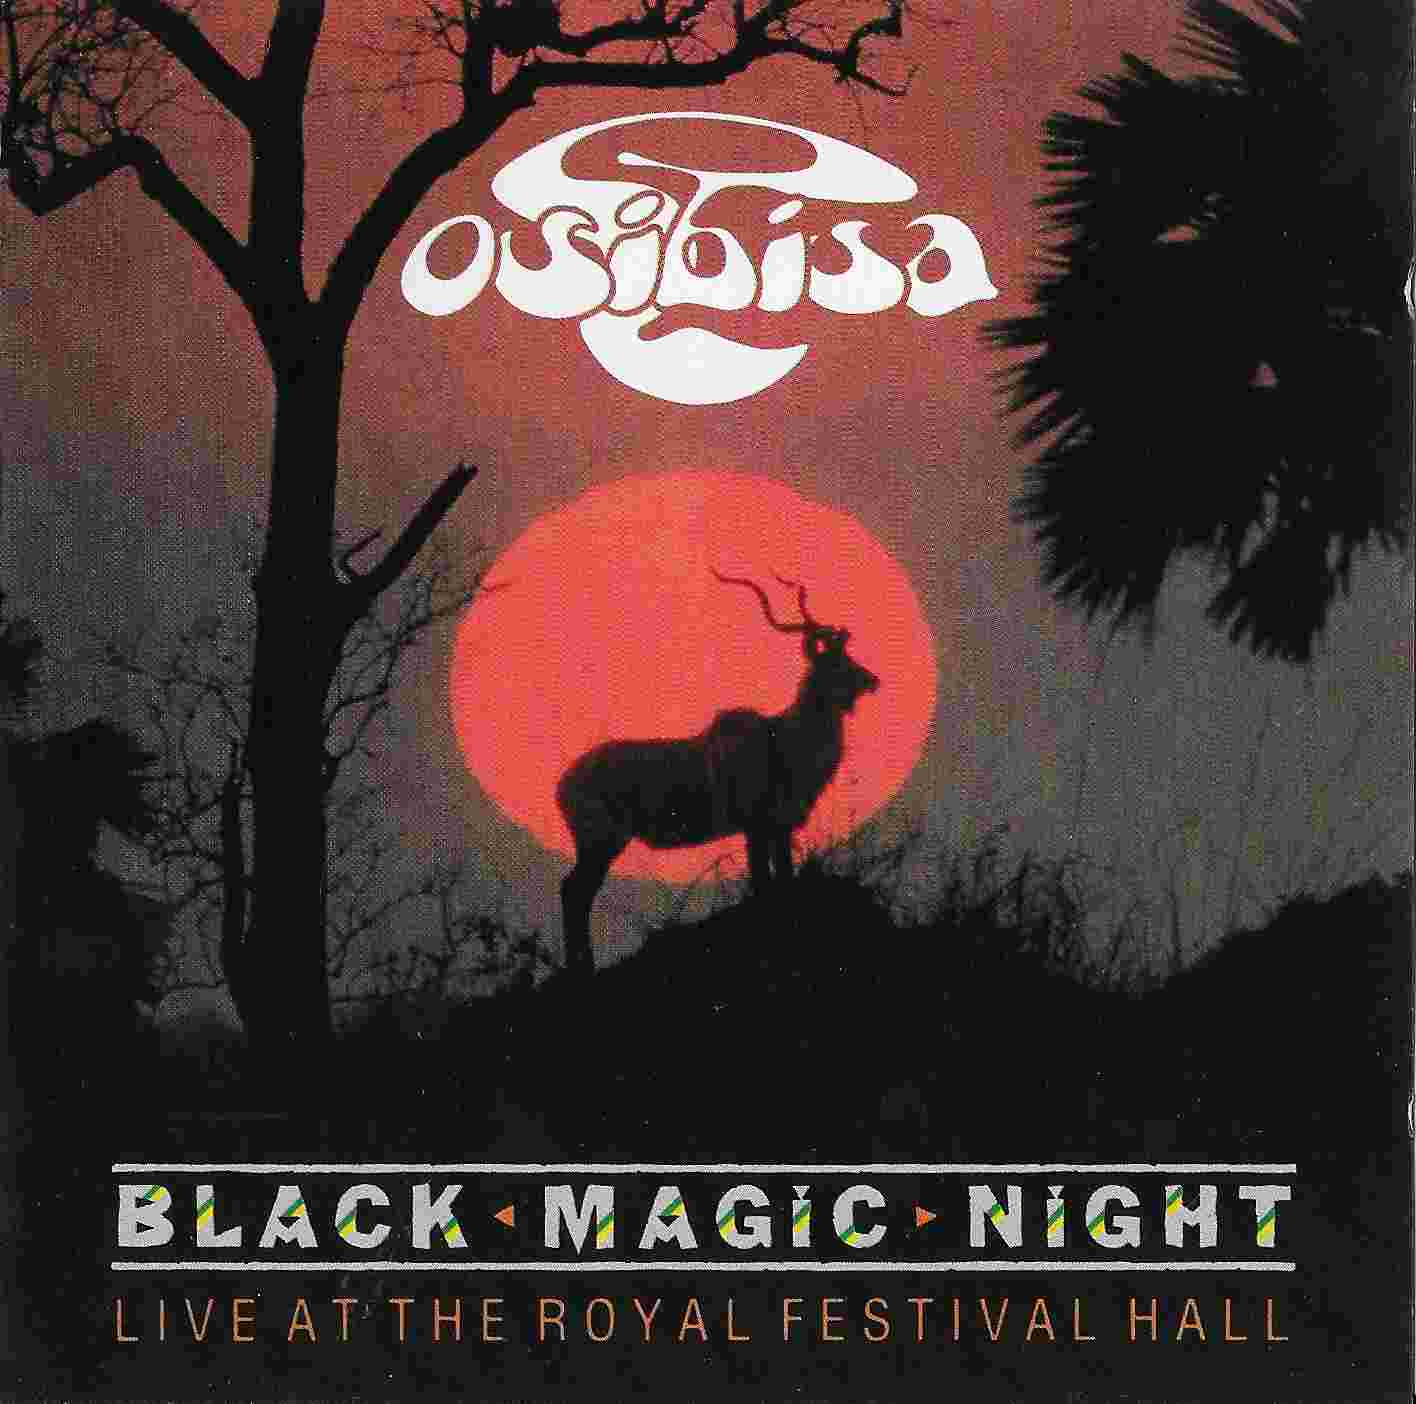 Picture of BBCCD777 Black magic night by artist Osibisa from the BBC cds - Records and Tapes library